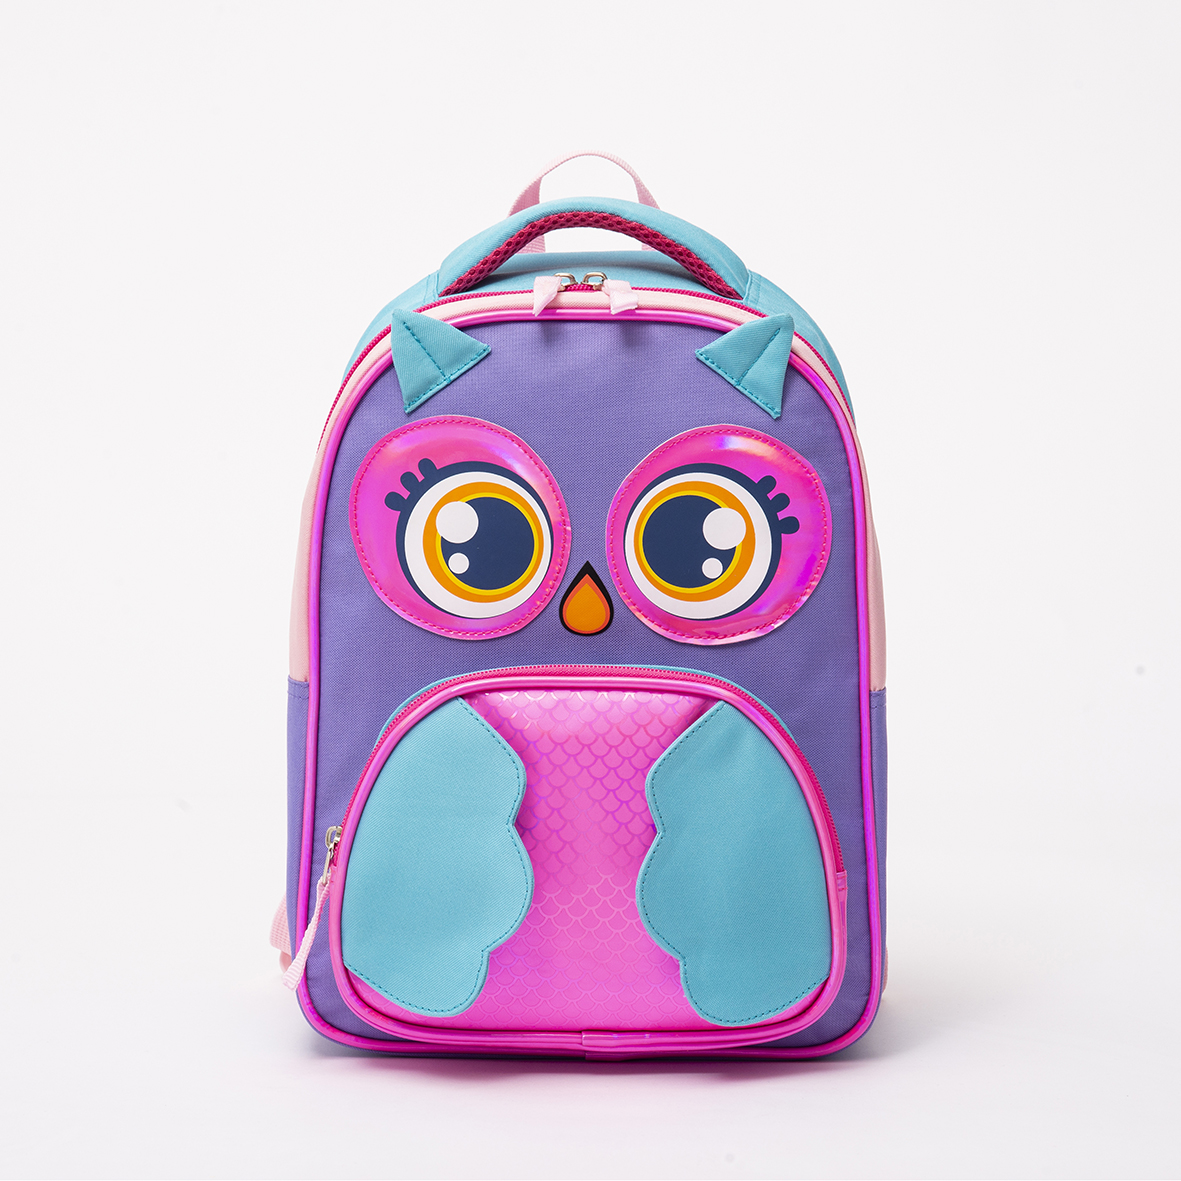 2021 High quality Lunch Bag For Kids - New design cute stereoscopic purple owl kids bag – Twinkling Star